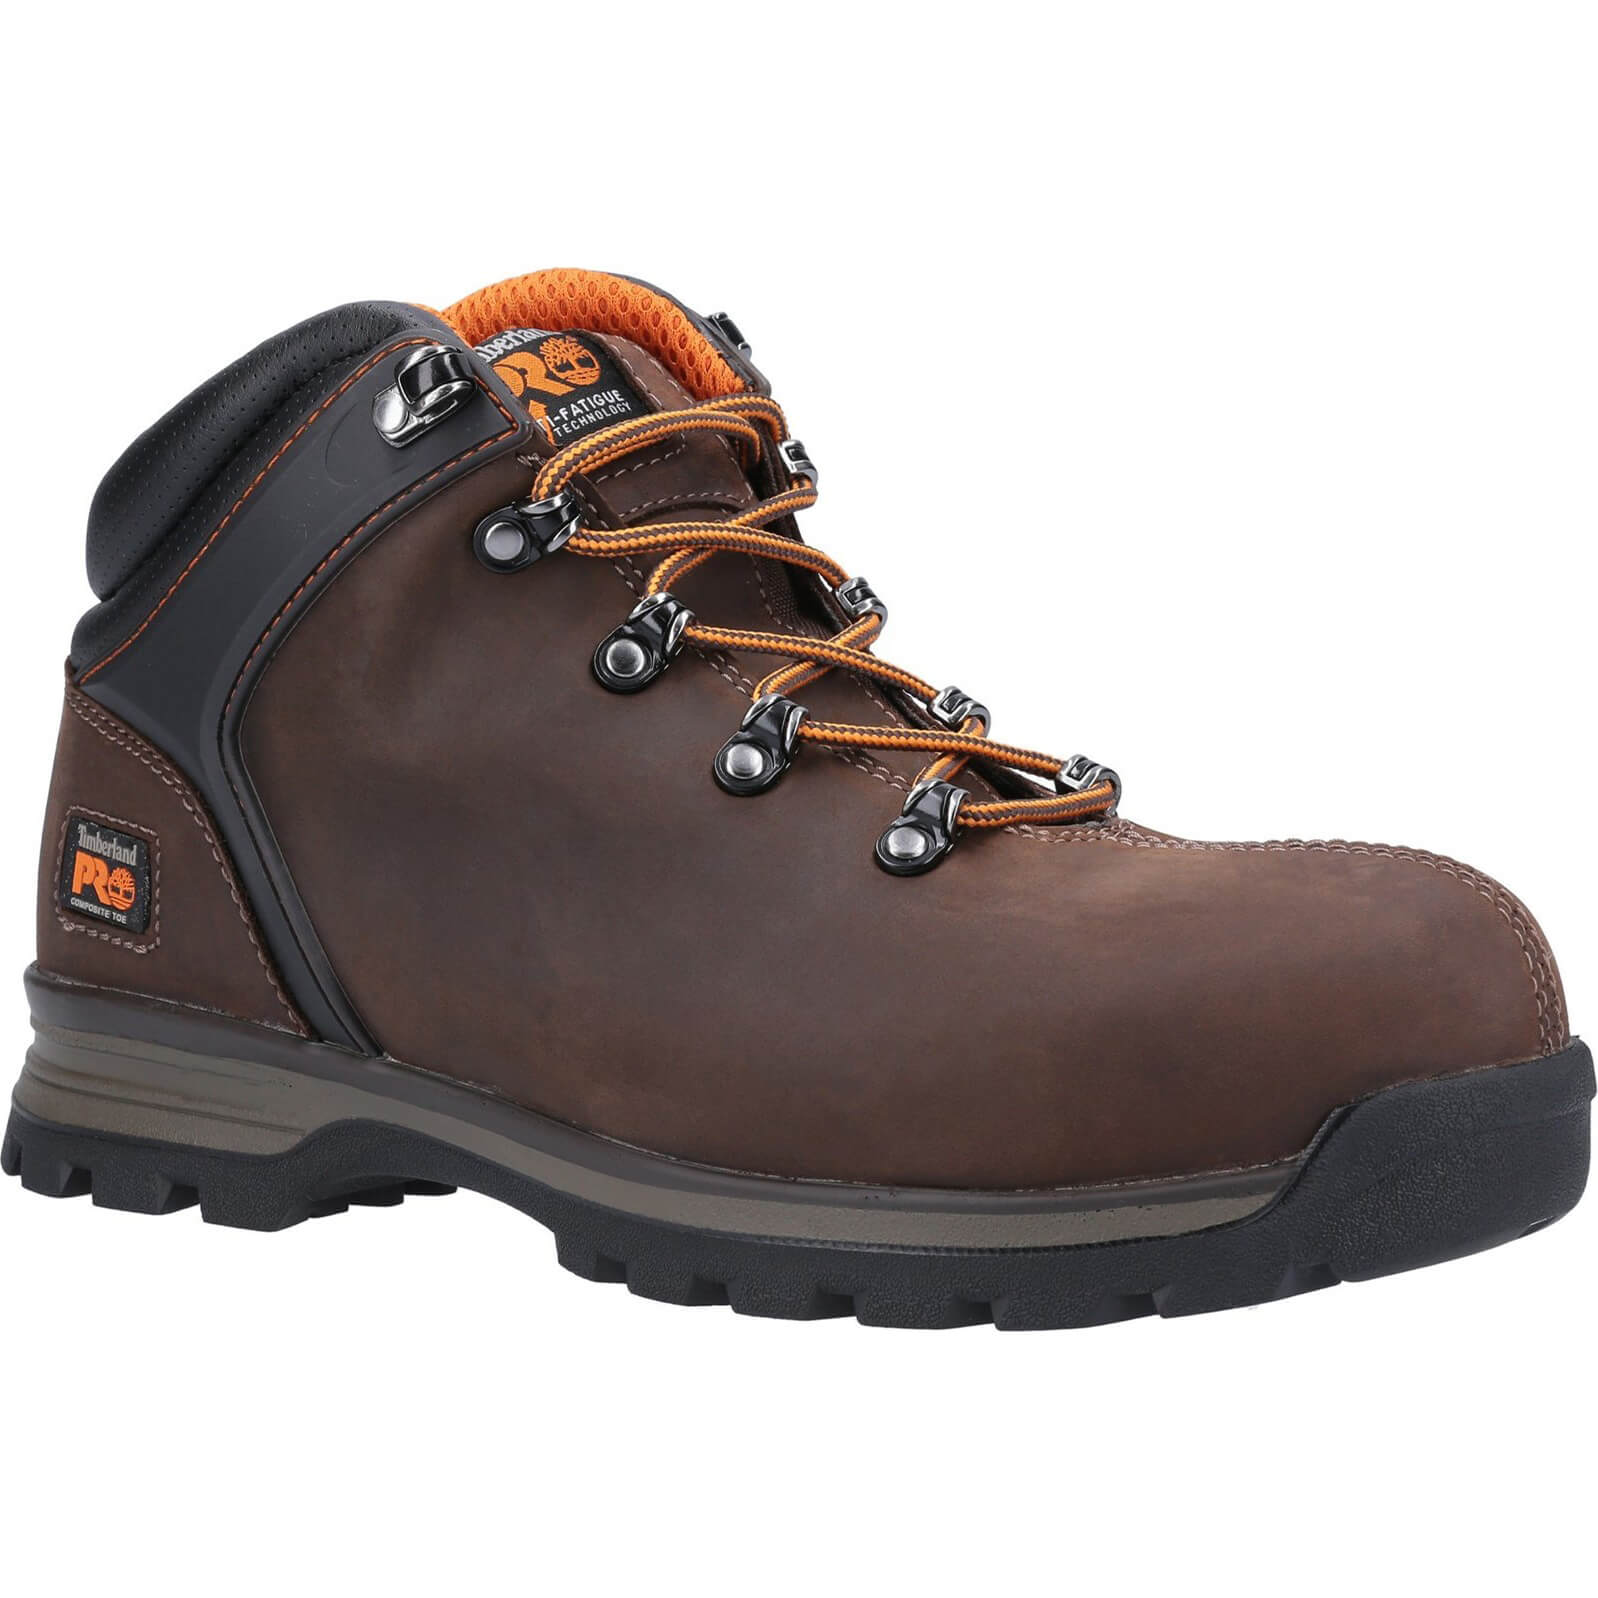 Image of Timberland Pro Splitrock XT Composite Safety Toe Work Boot Brown Size 8